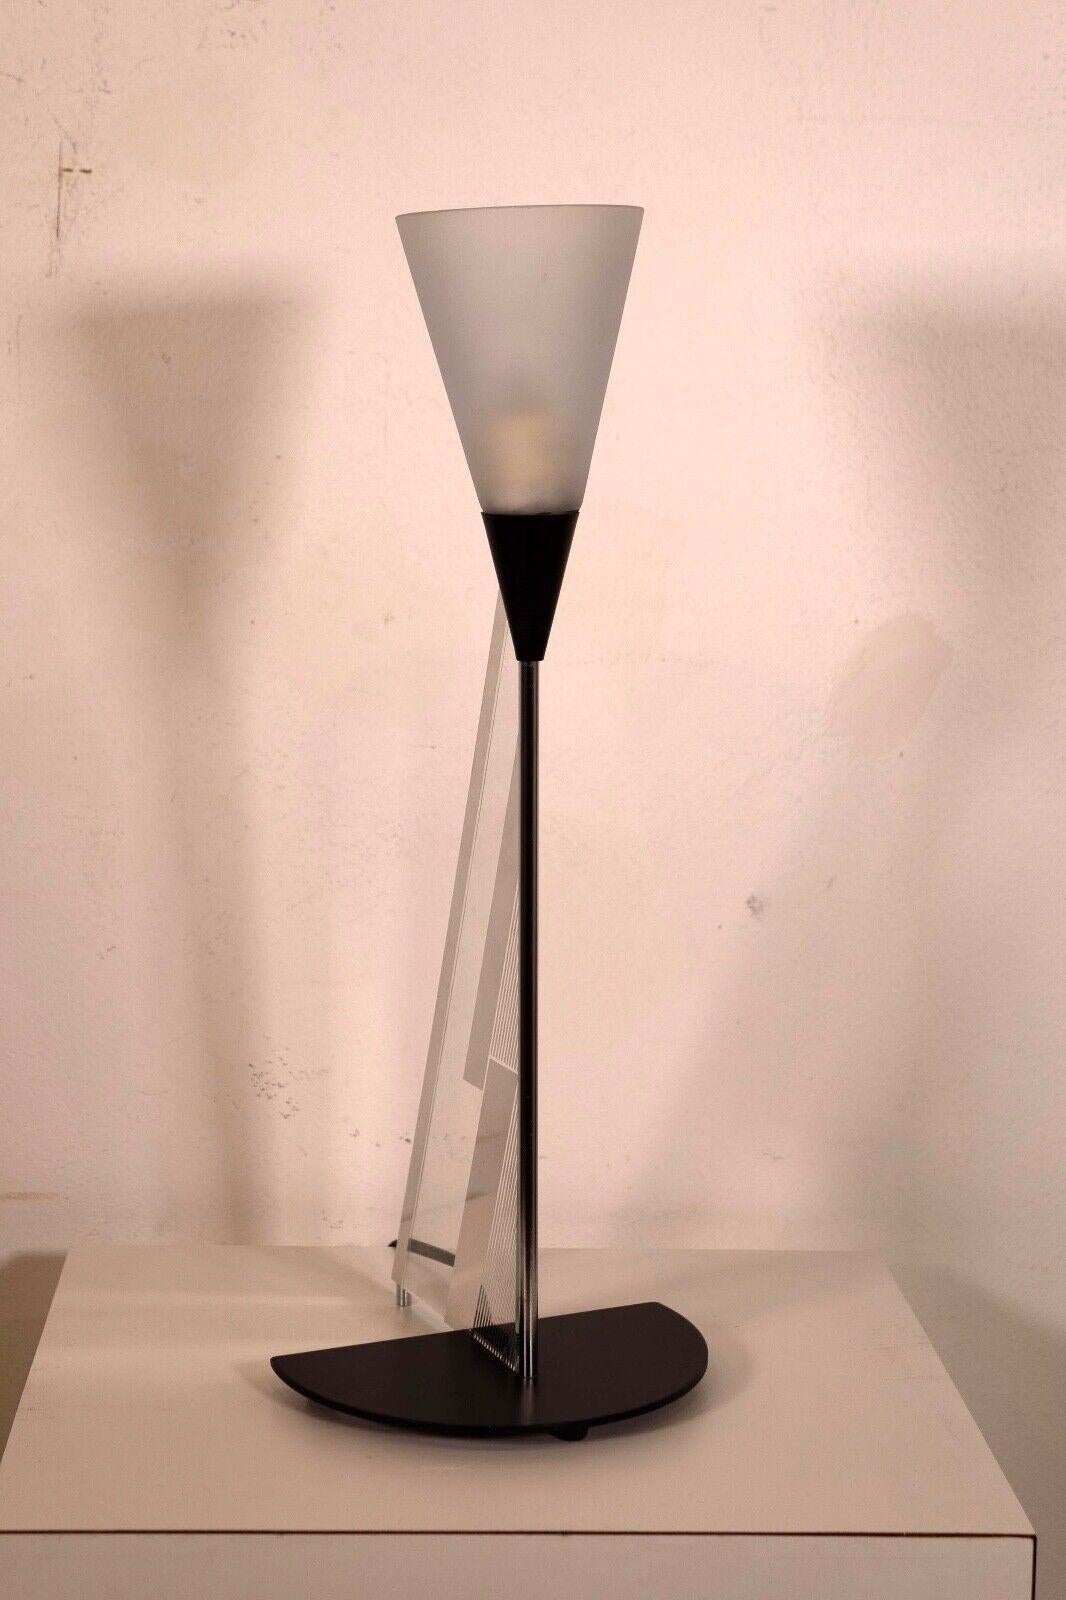 The Canetti Mid Century Modern Triangular Shaped Lamp features a sleek, geometric design with a sharp triangular shape that tapers towards the top. Its base is a black semi-circle that complements the lamp's modern aesthetic, providing a stable